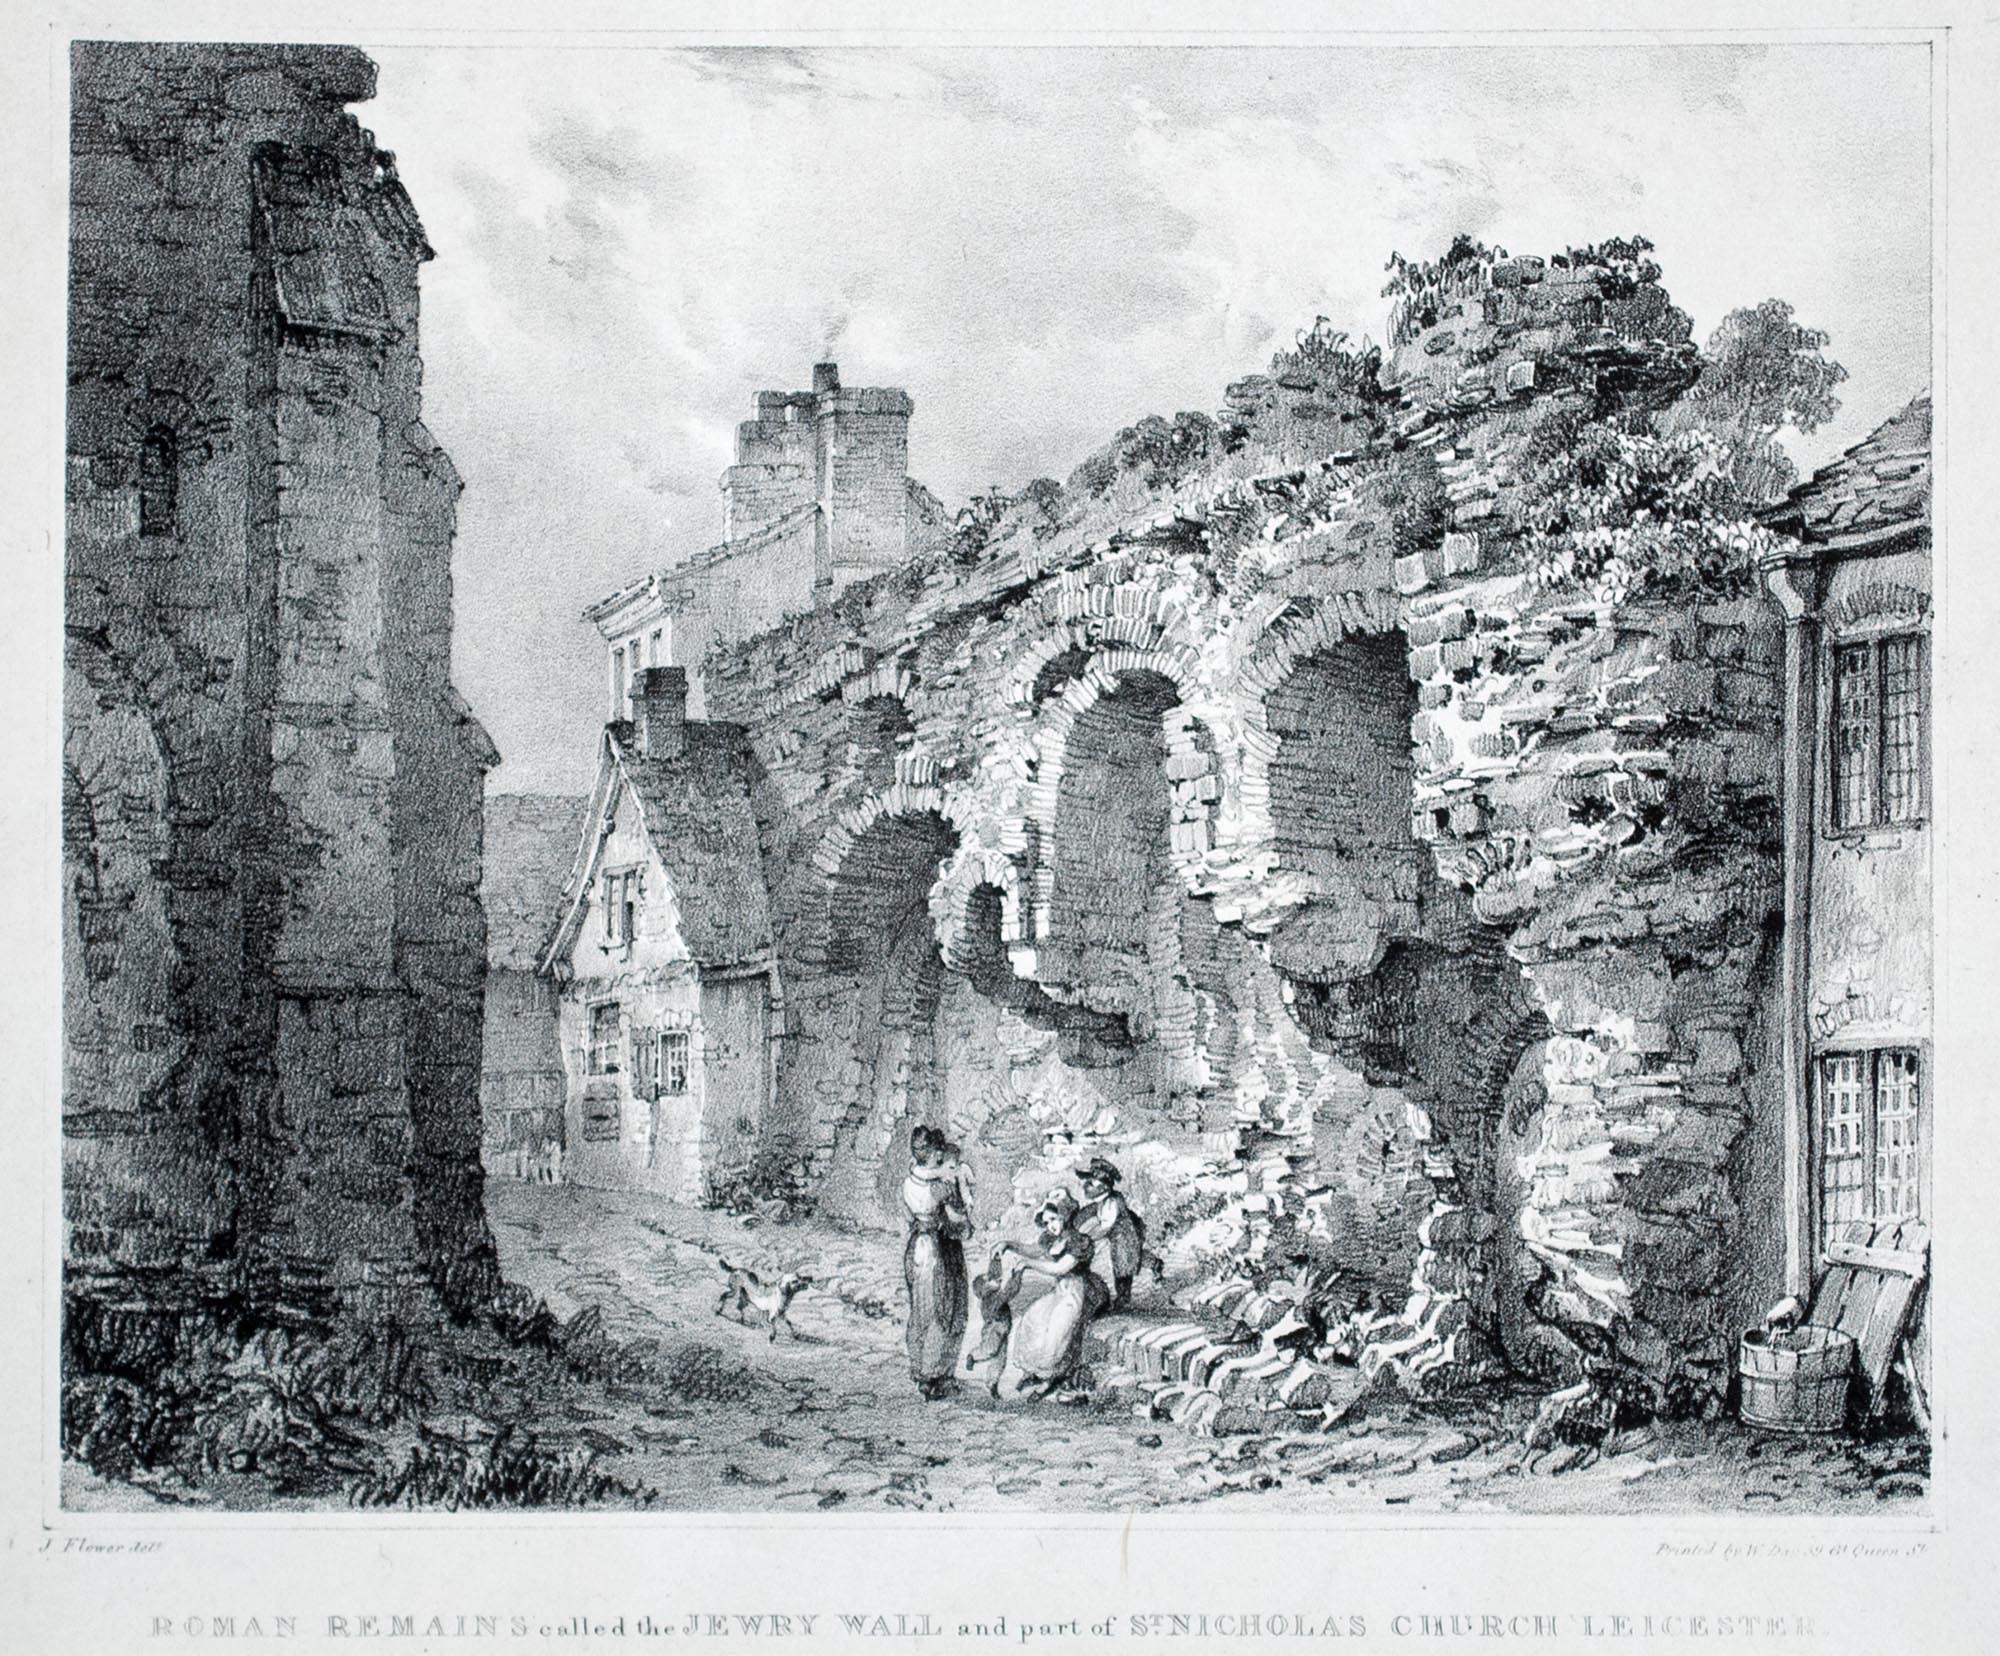 'Roman Remains called the Jewry Wall' by J. Flower, 1836 - 